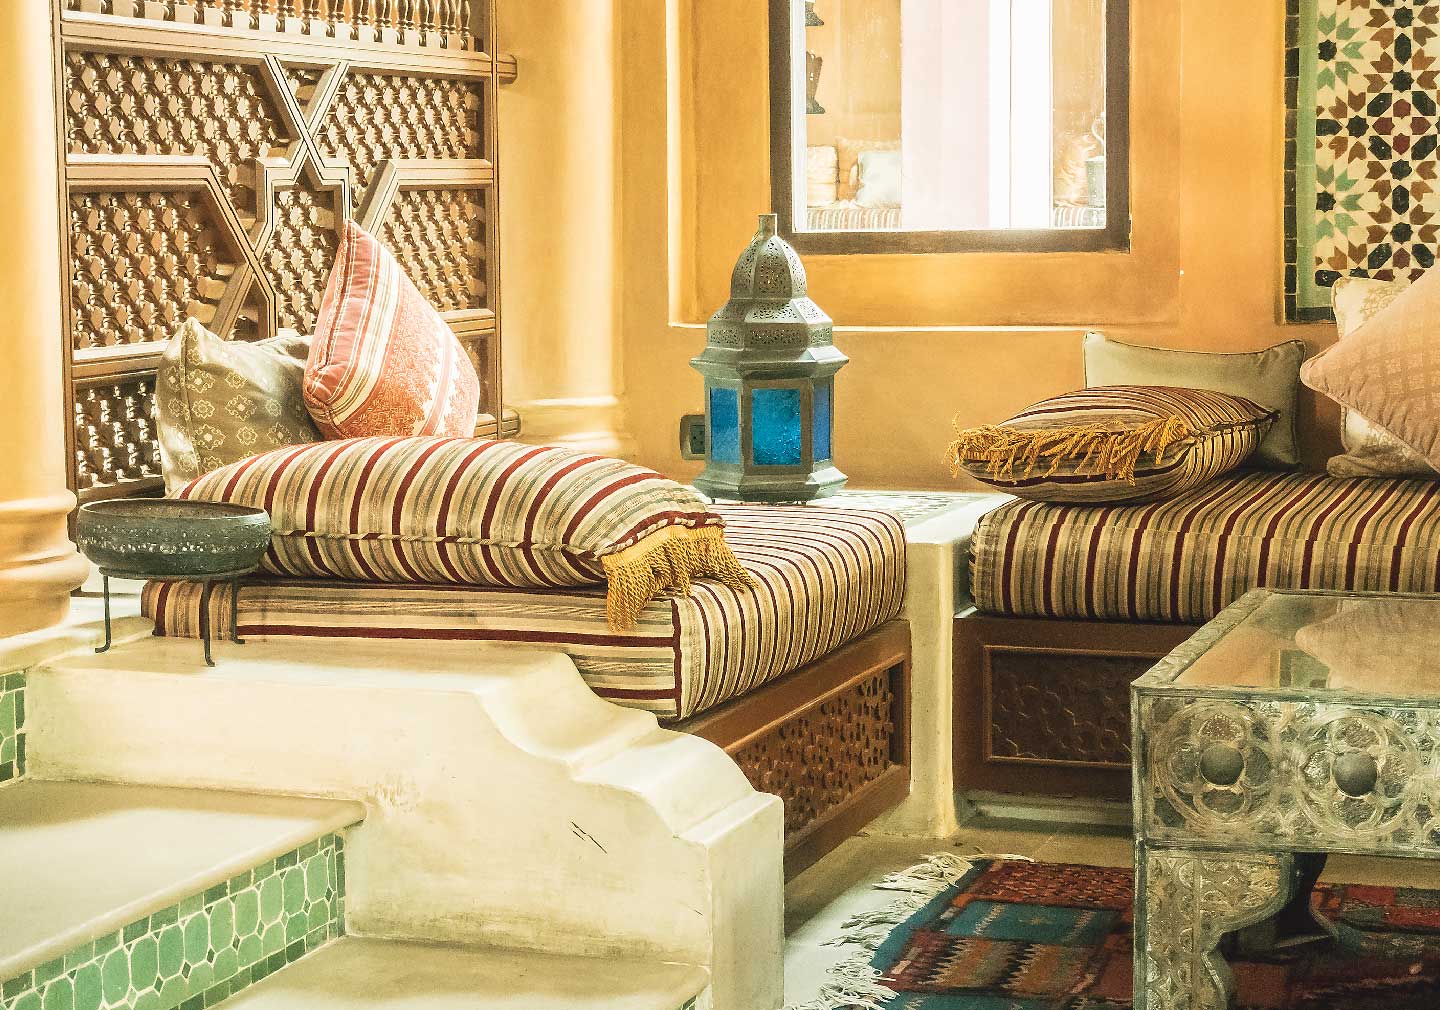 Magic in the Details for Moroccan interior designs